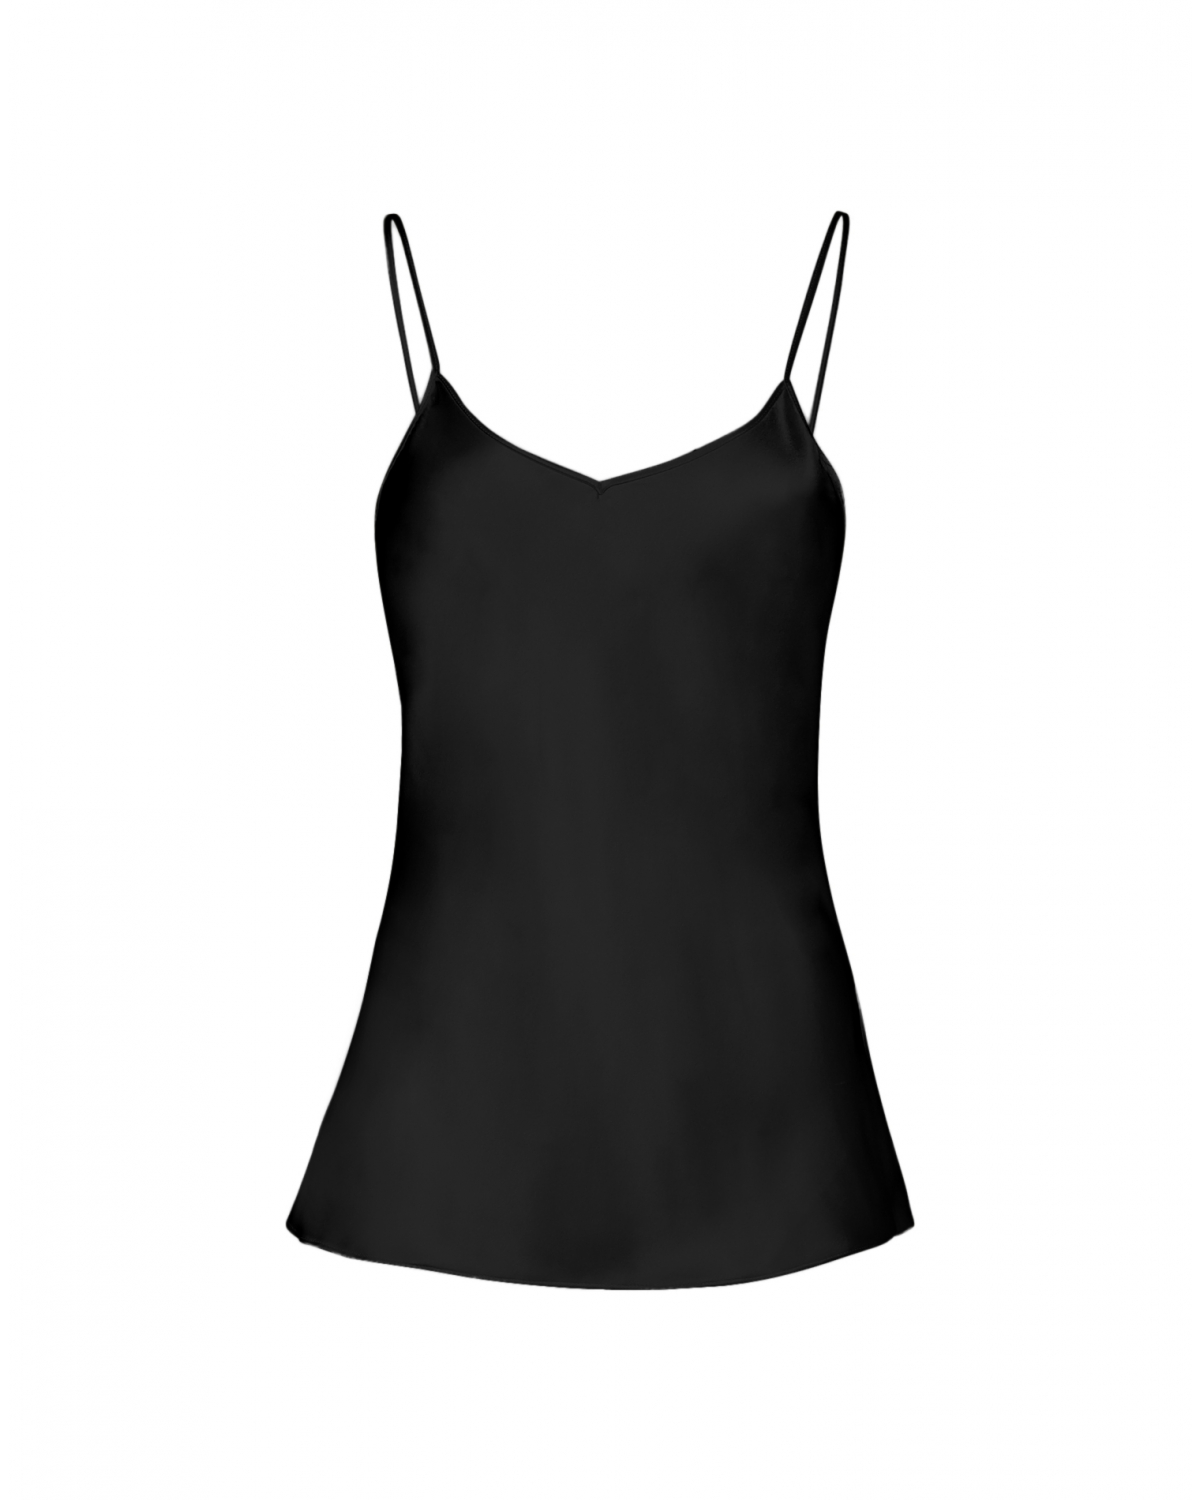 Black top with thin shoulder straps